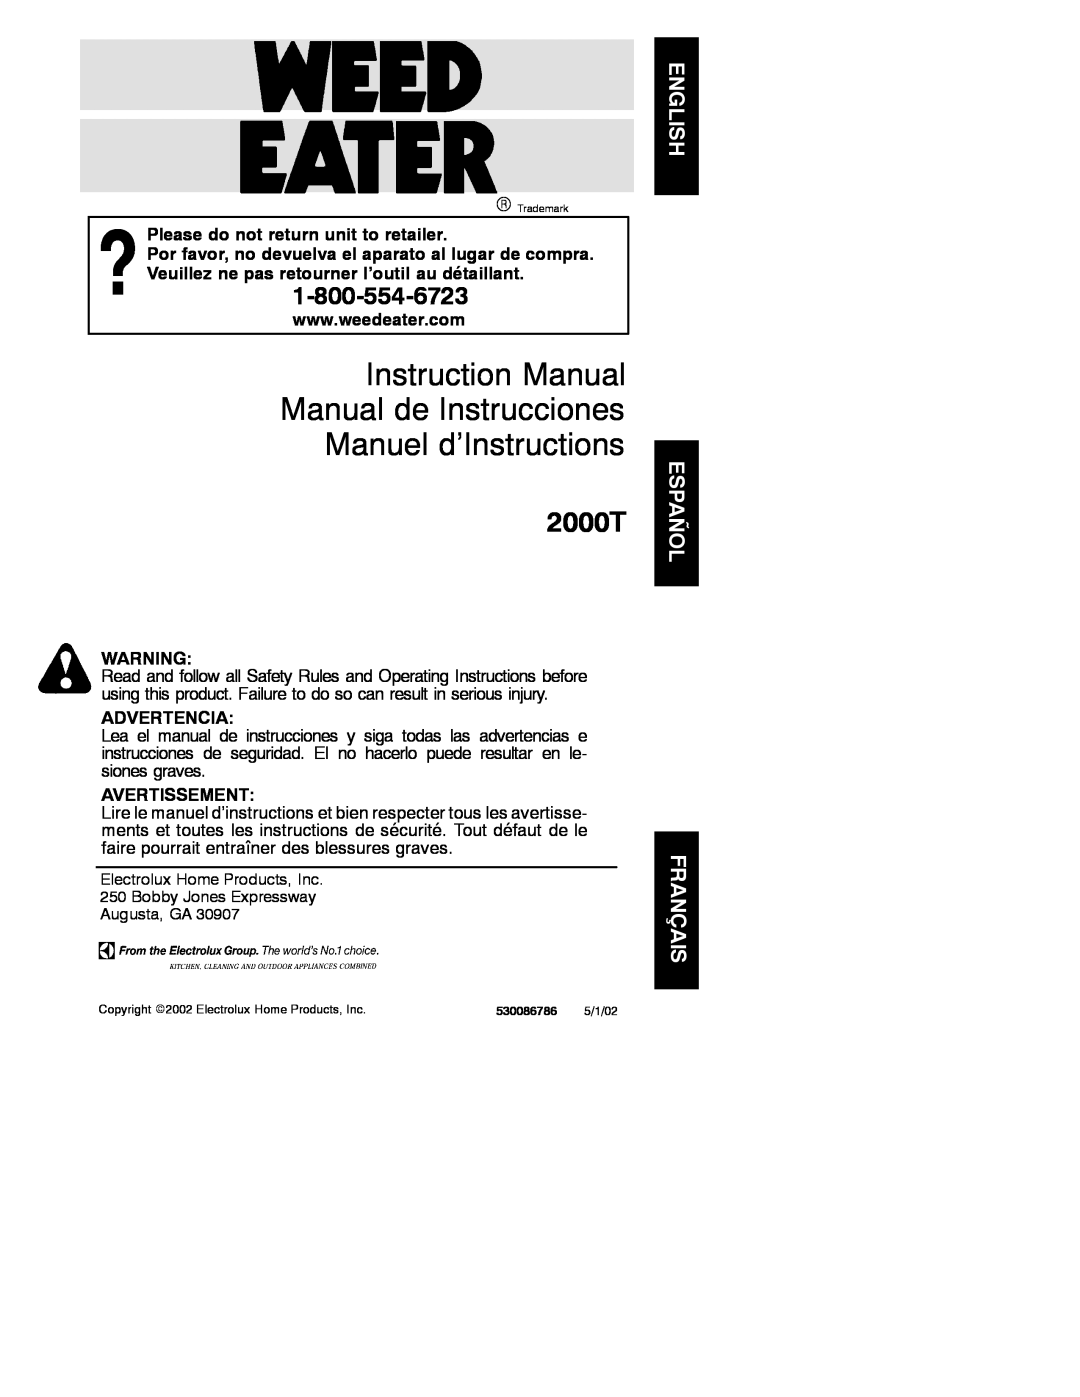 Weed Eater 530086786 instruction manual Please do not return unit to retailer, Advertencia, Avertissement, 2000T 